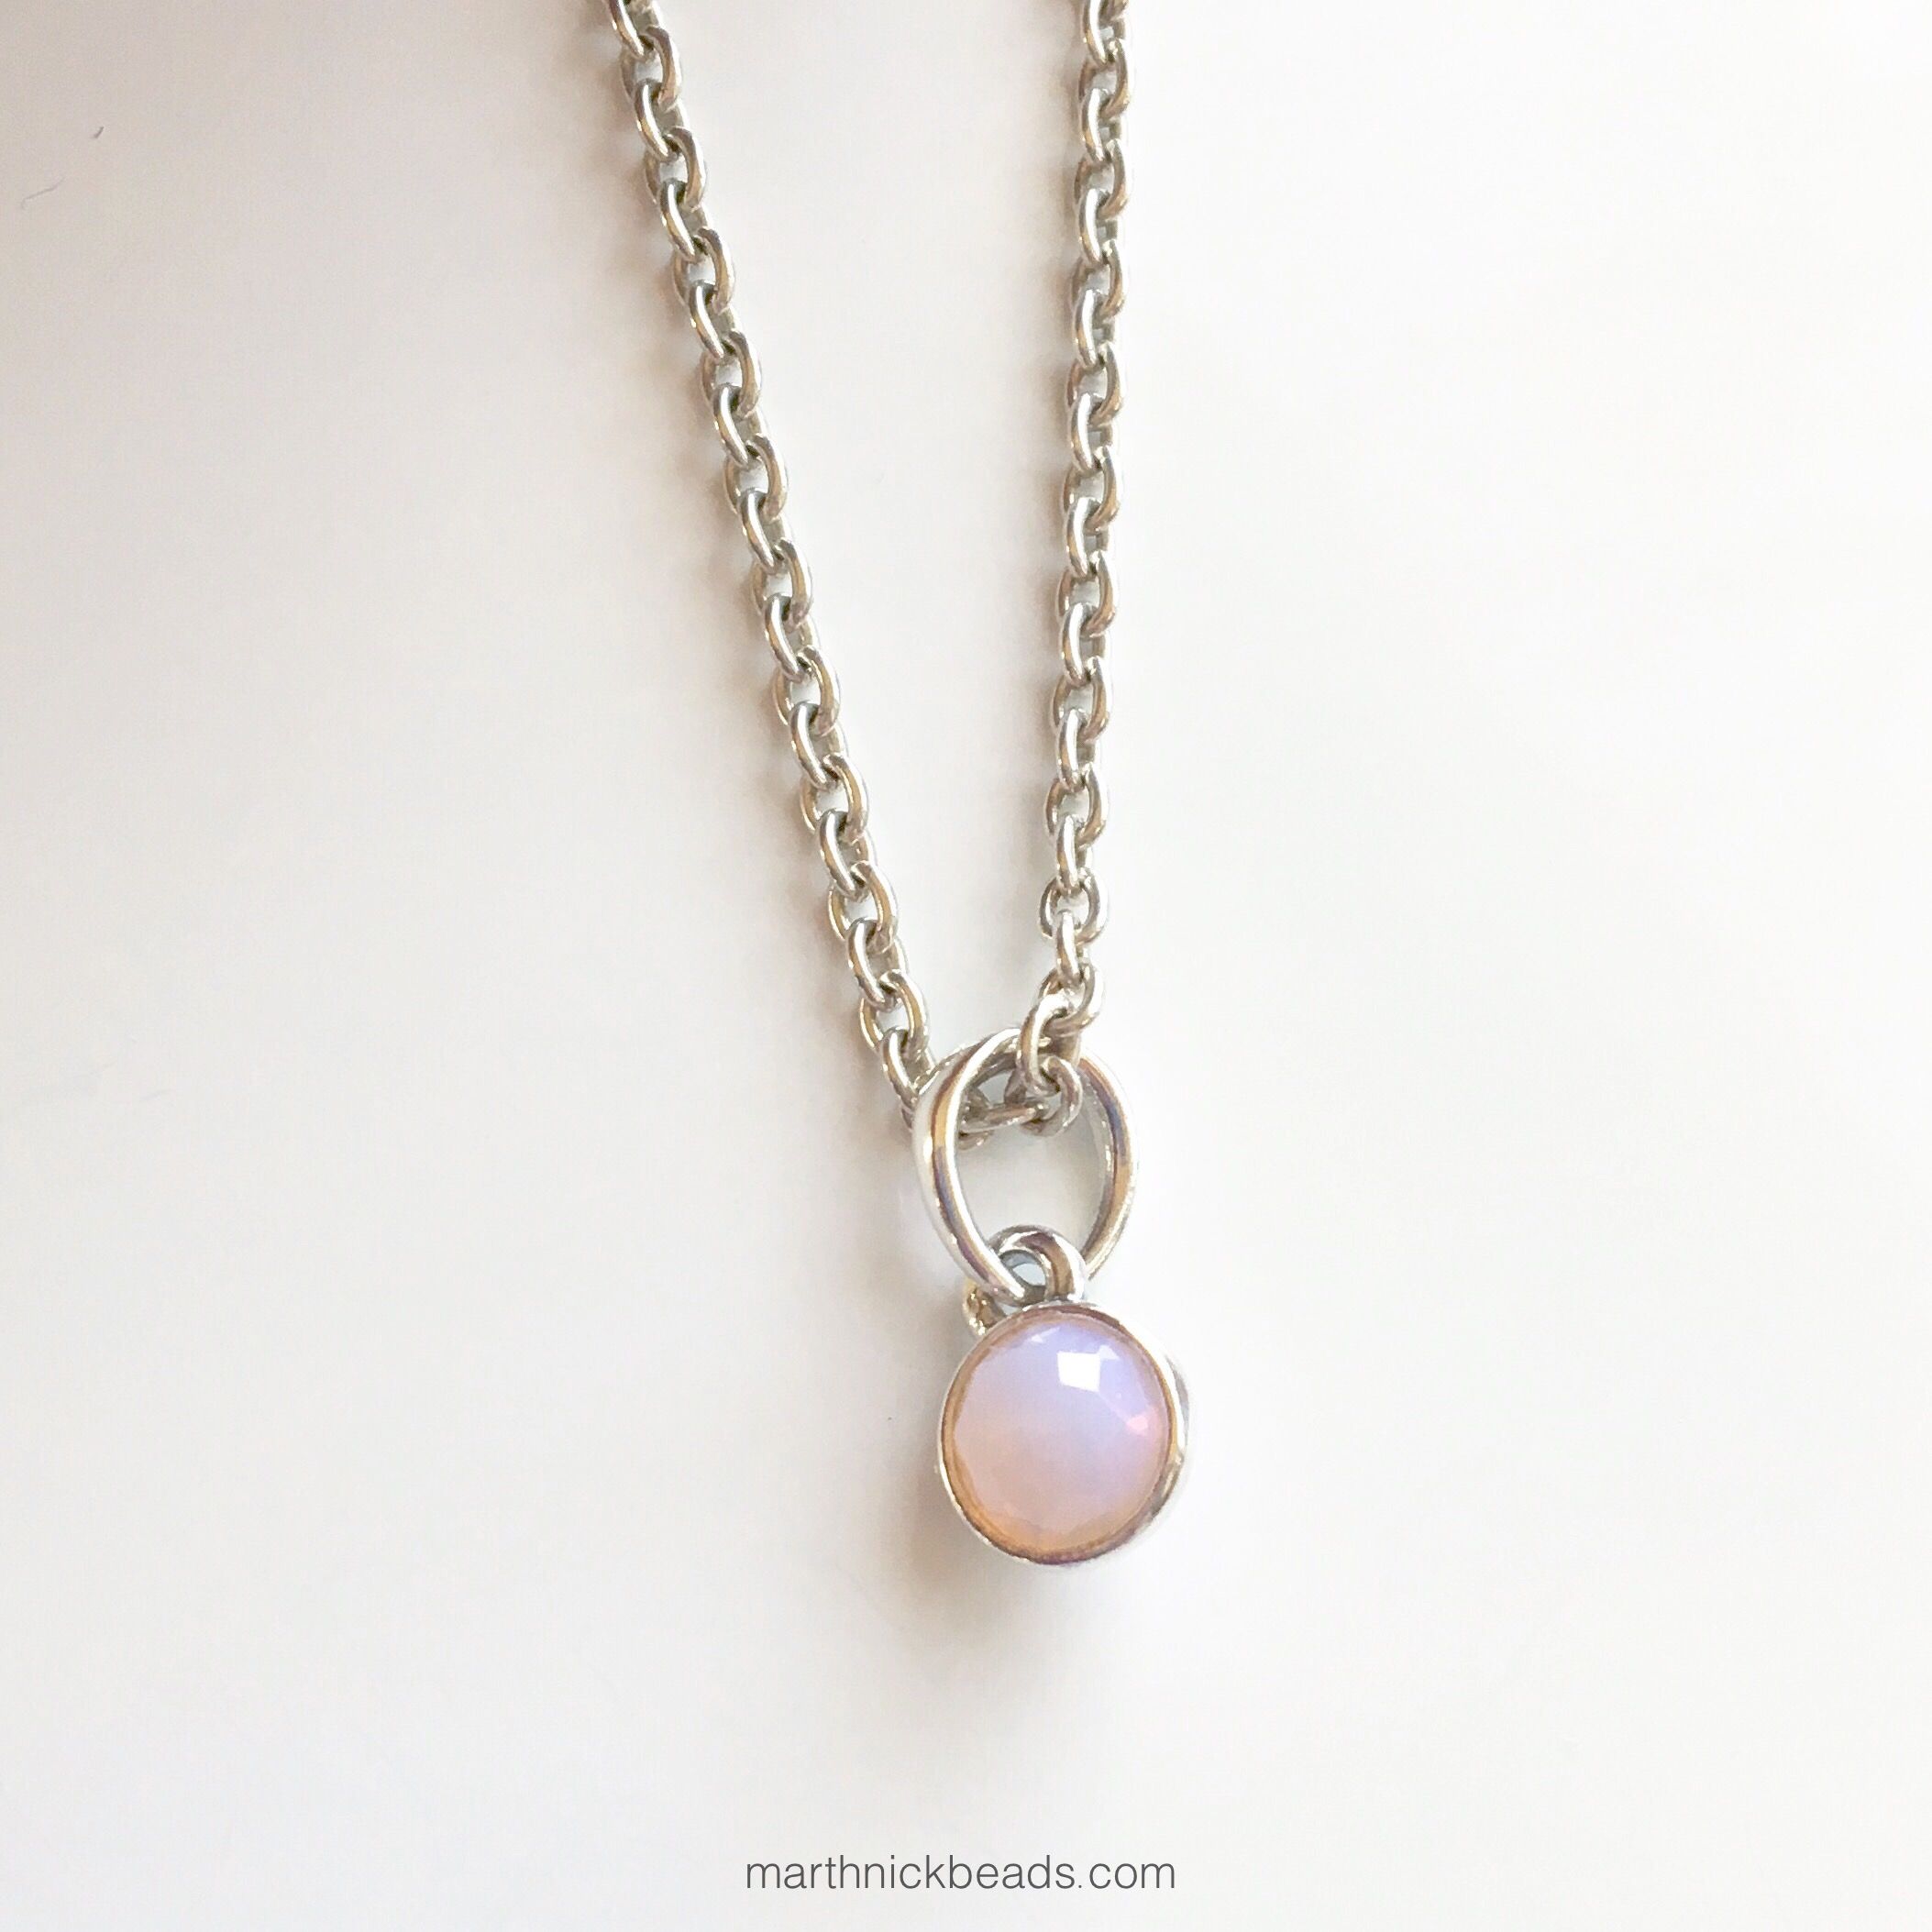 Pandora Opalescent Pink Crystal! – Marthnickbeads For Most Up To Date Opalescent Pink Crystal October Droplet Pendant Necklaces (View 5 of 25)